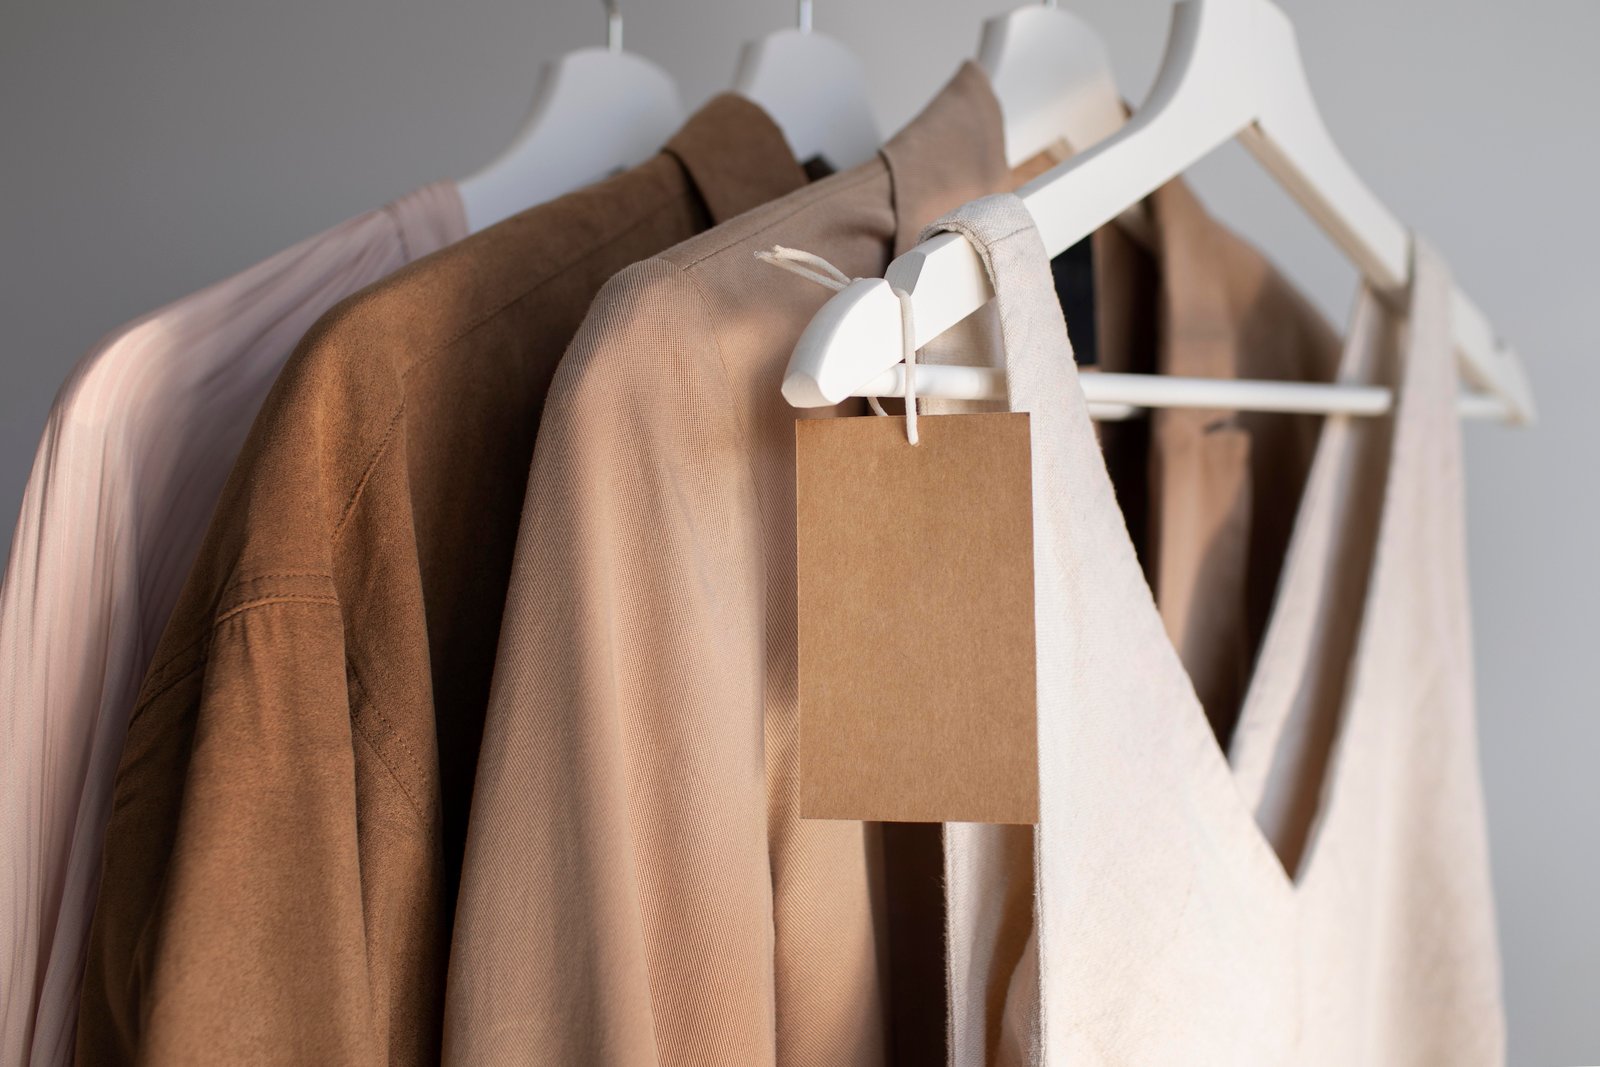 5 Essential Tips for Building a Capsule Wardrobe